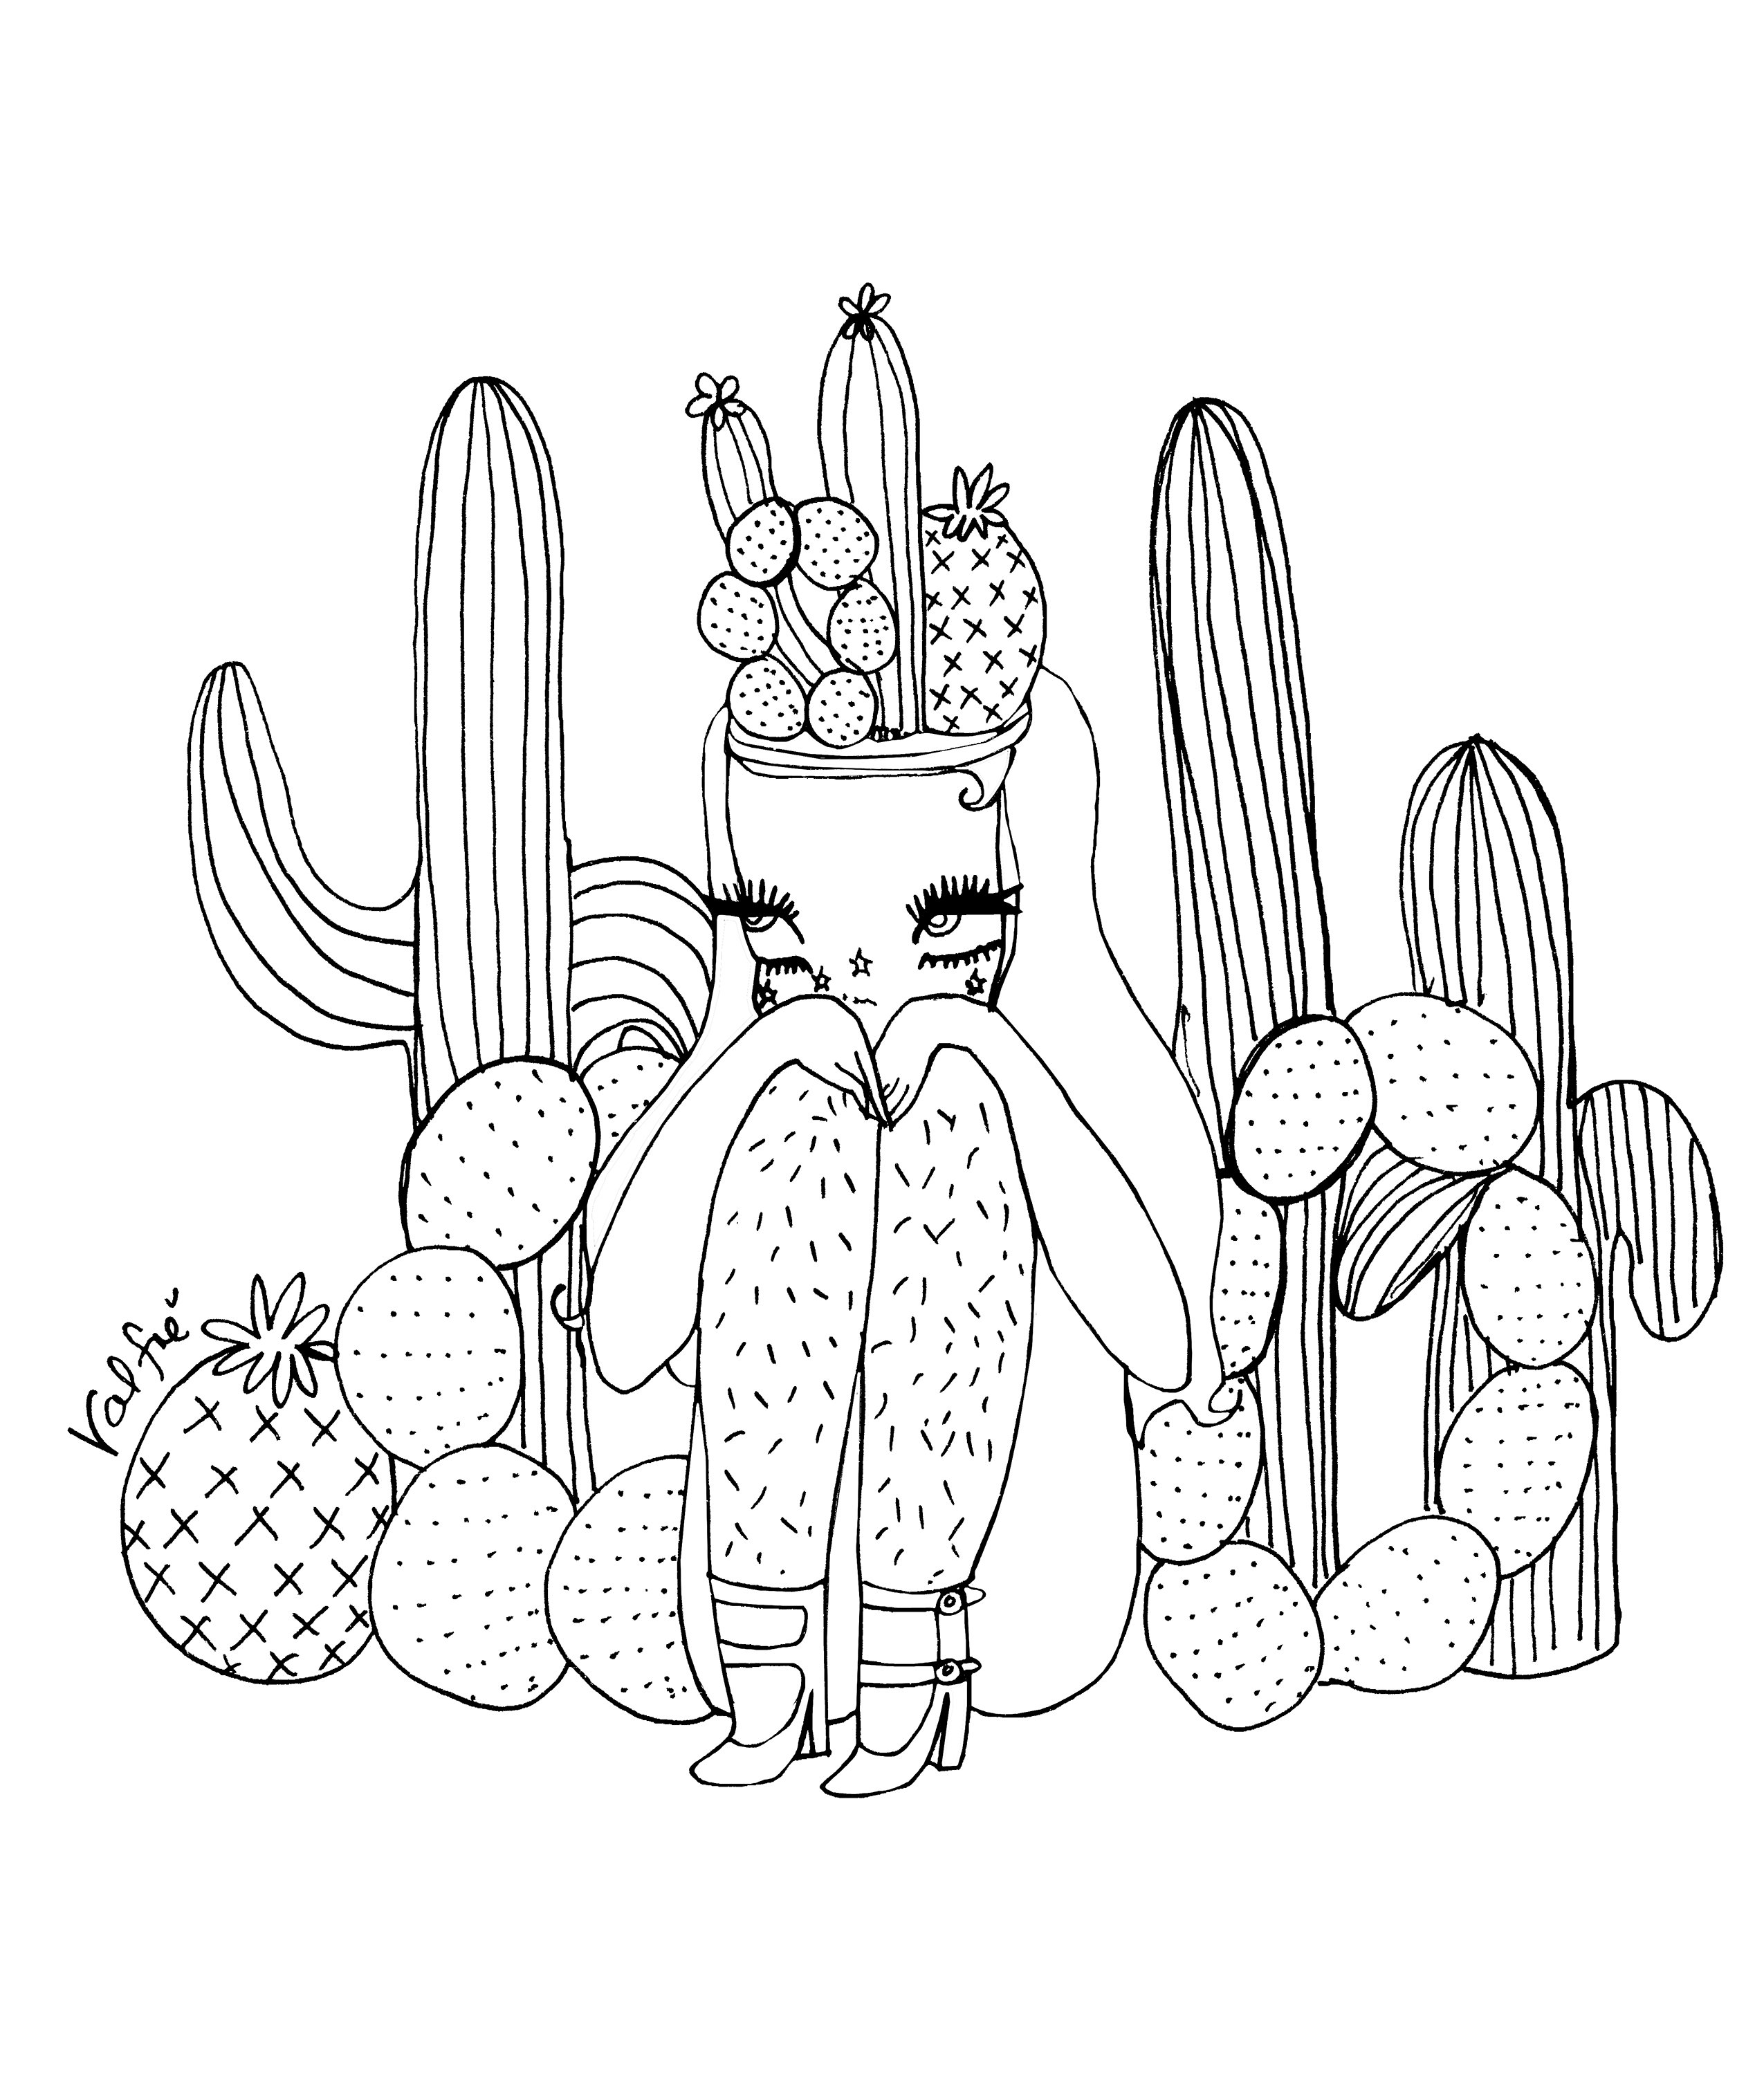 Aesthetic Coloring Pages Simple Strange Magic Coloring Pages at